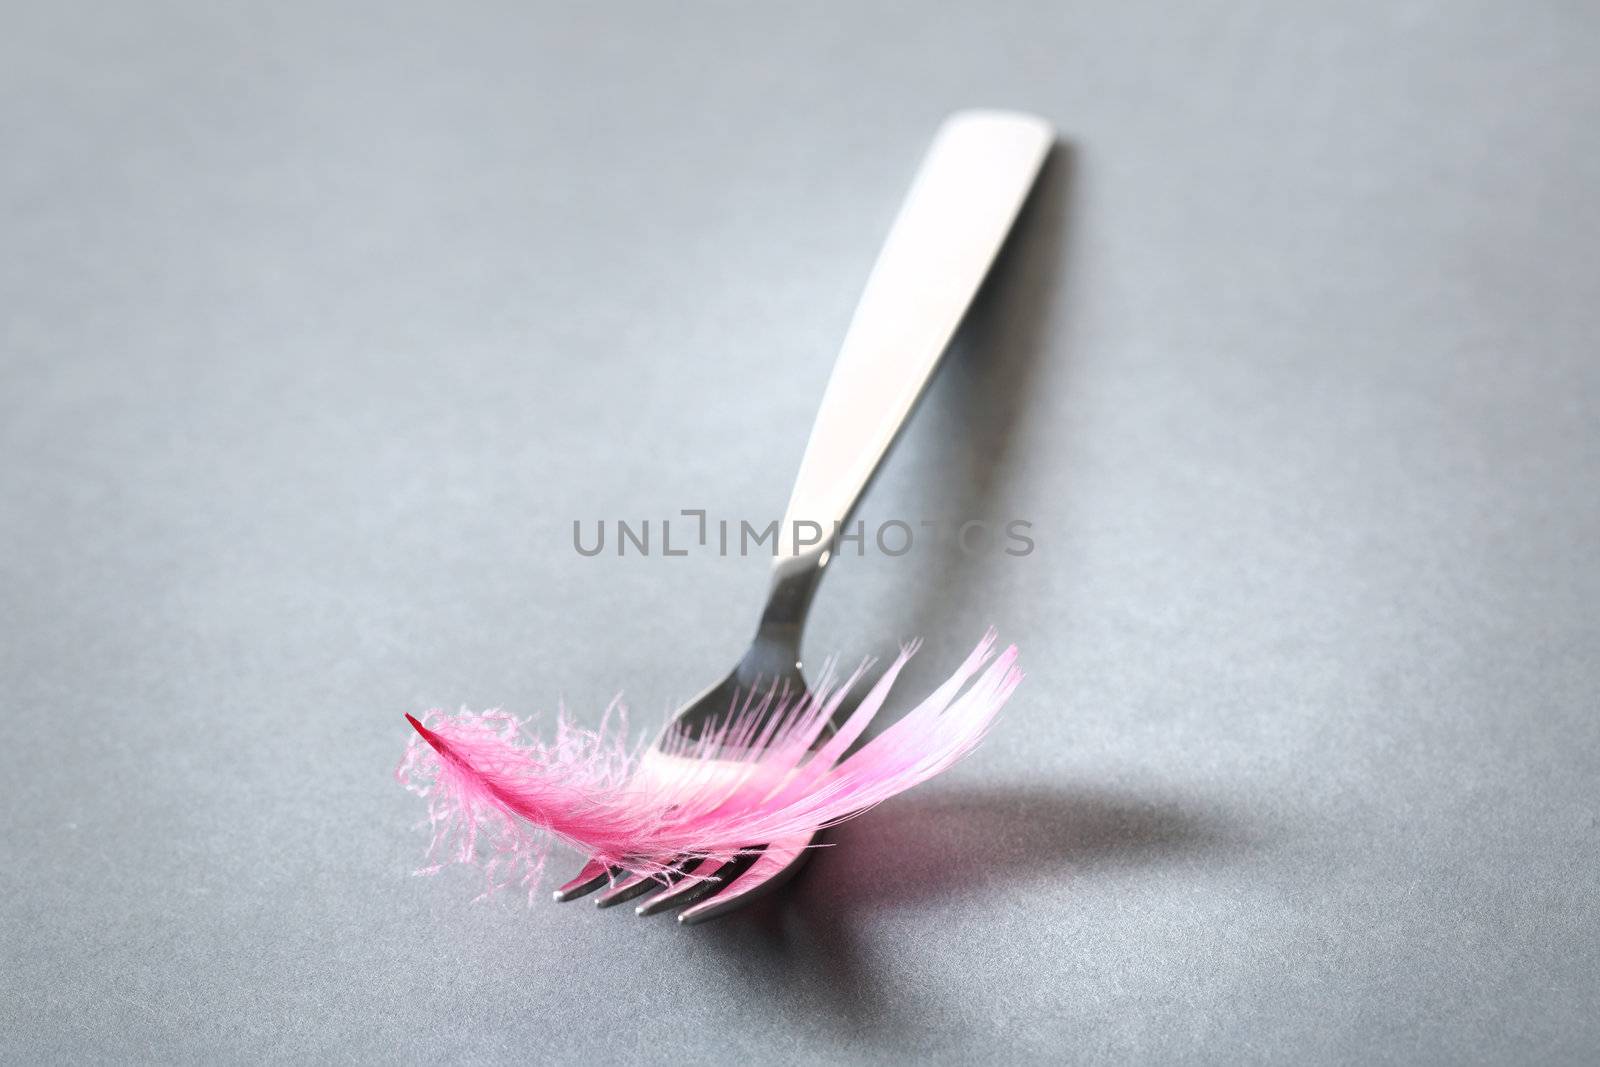 Fork with a bird feather on the grey background